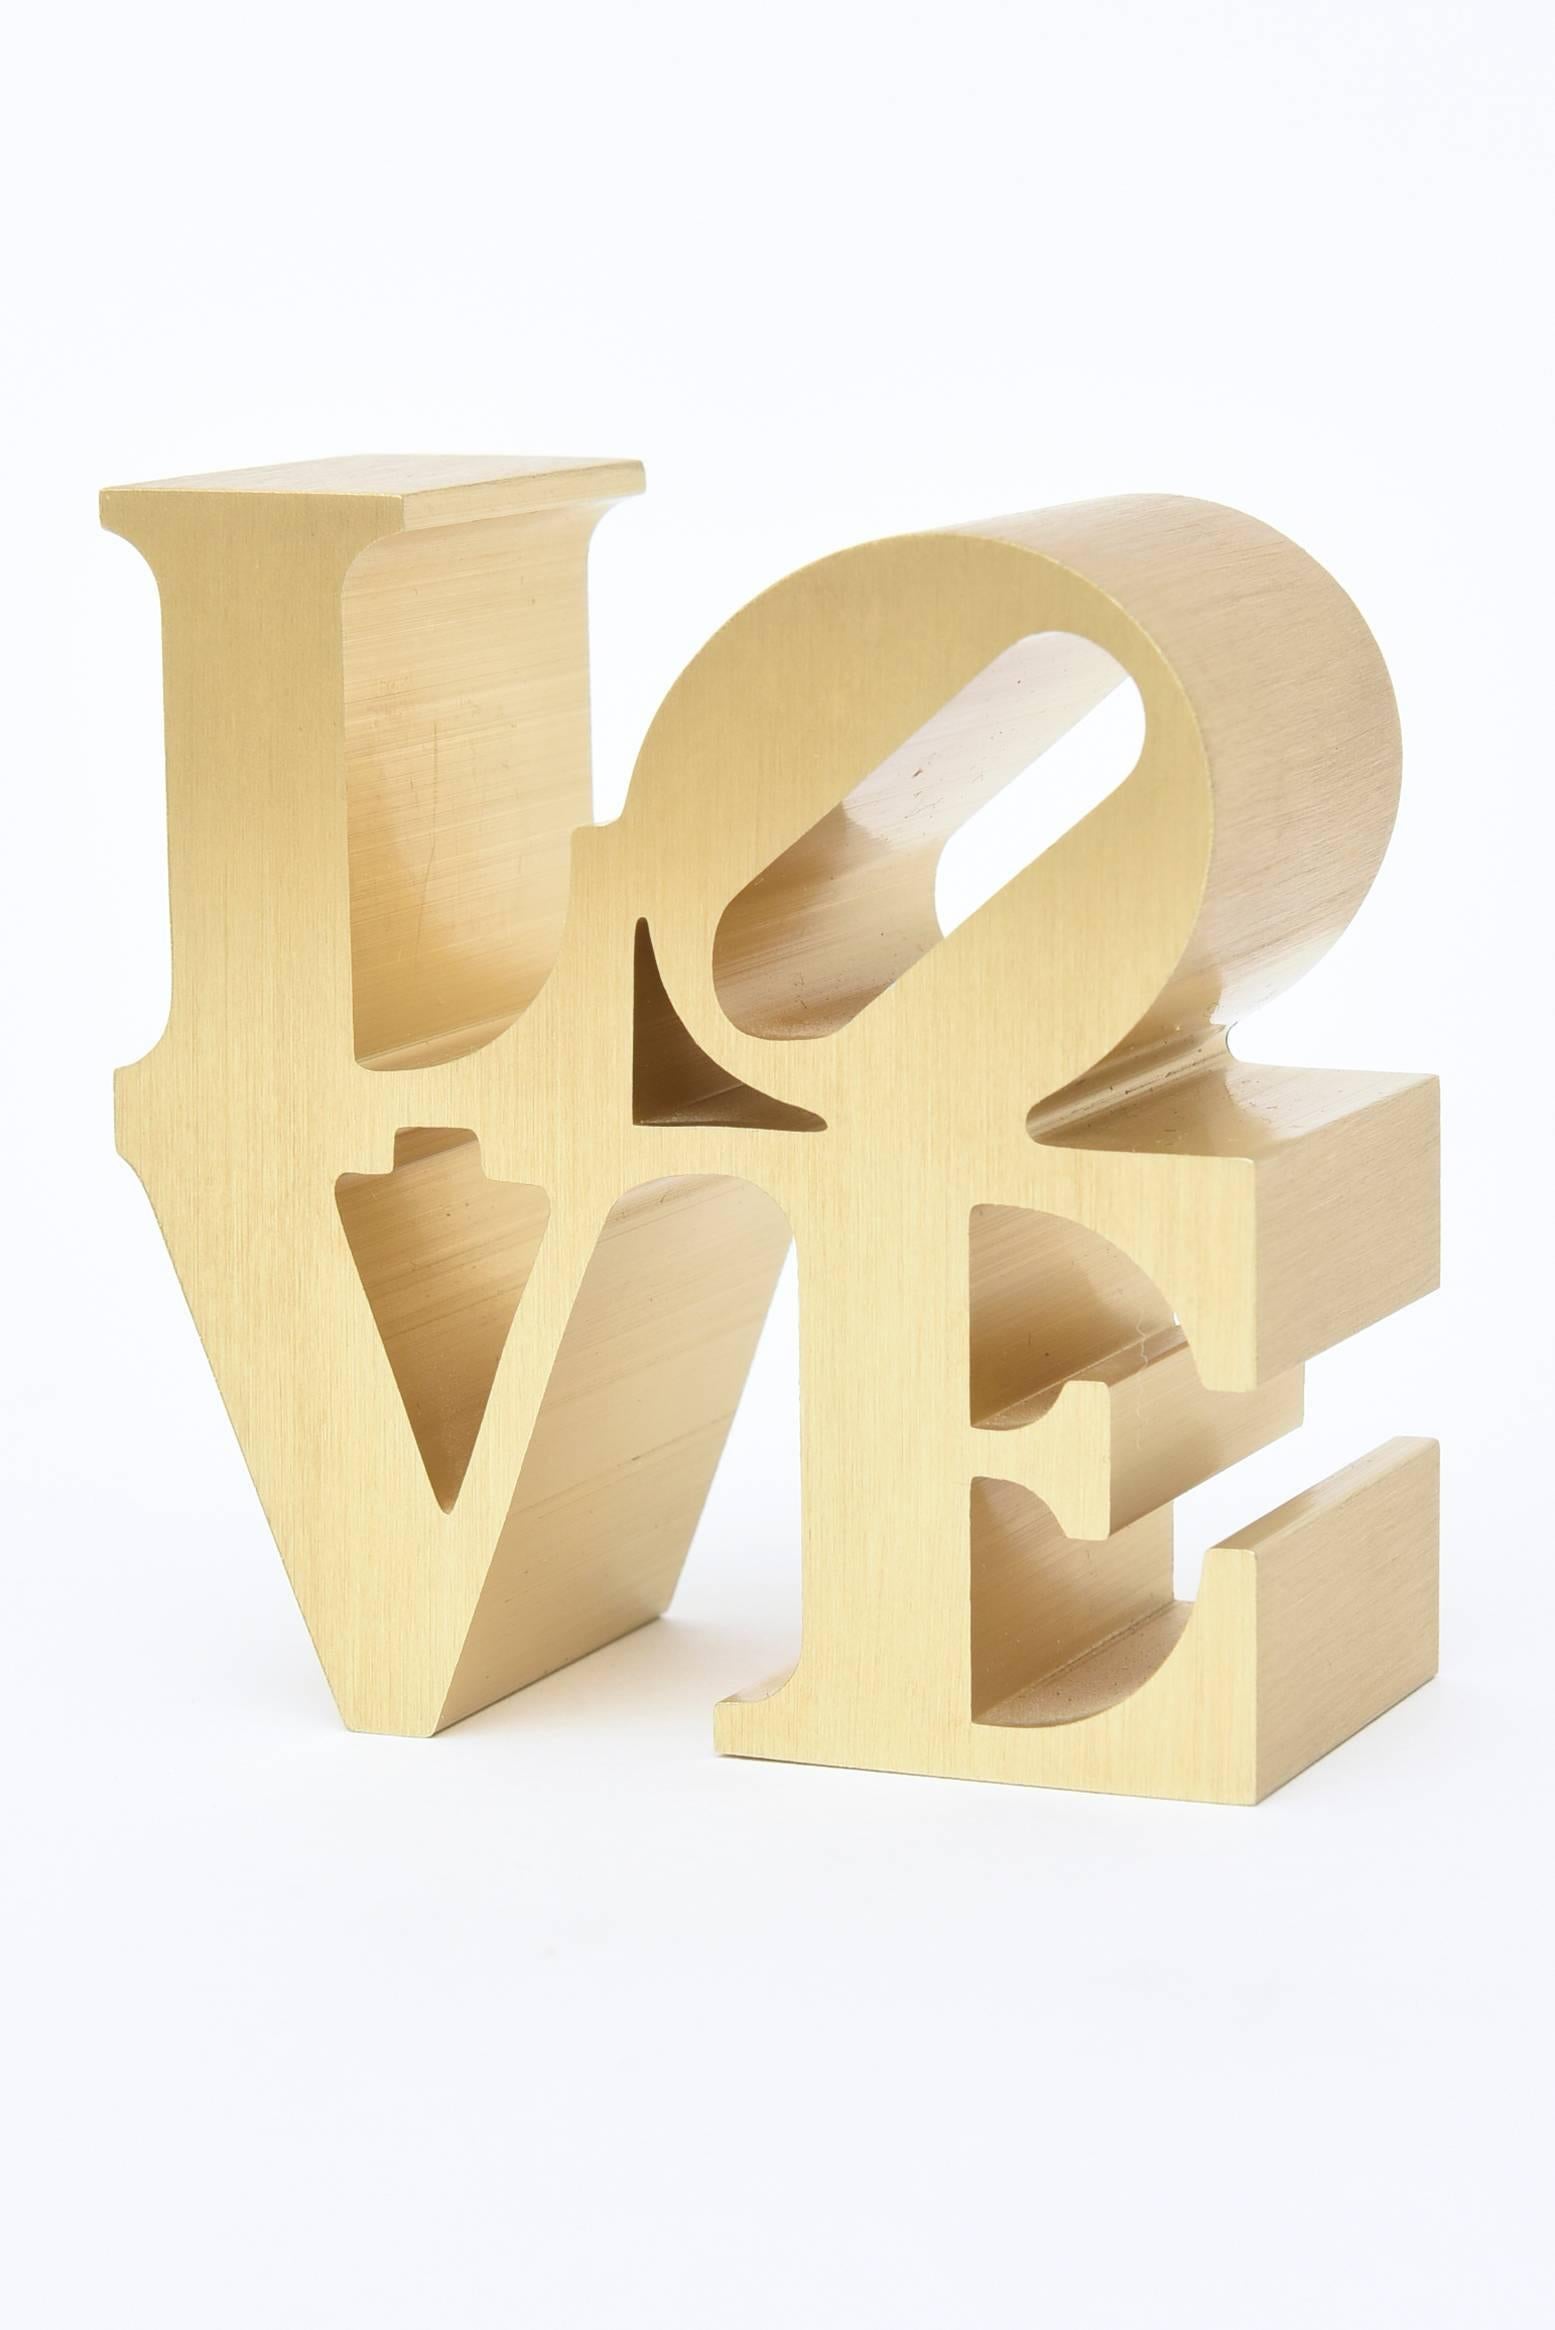 Robert Indiana became famous for his large love sculpture. This miniature sculpture paperweight was done in the 1970s and sold in museum stores then such as MoMA.
It is a small sculpture or a paperweight for a desk accessory!
It is brushed